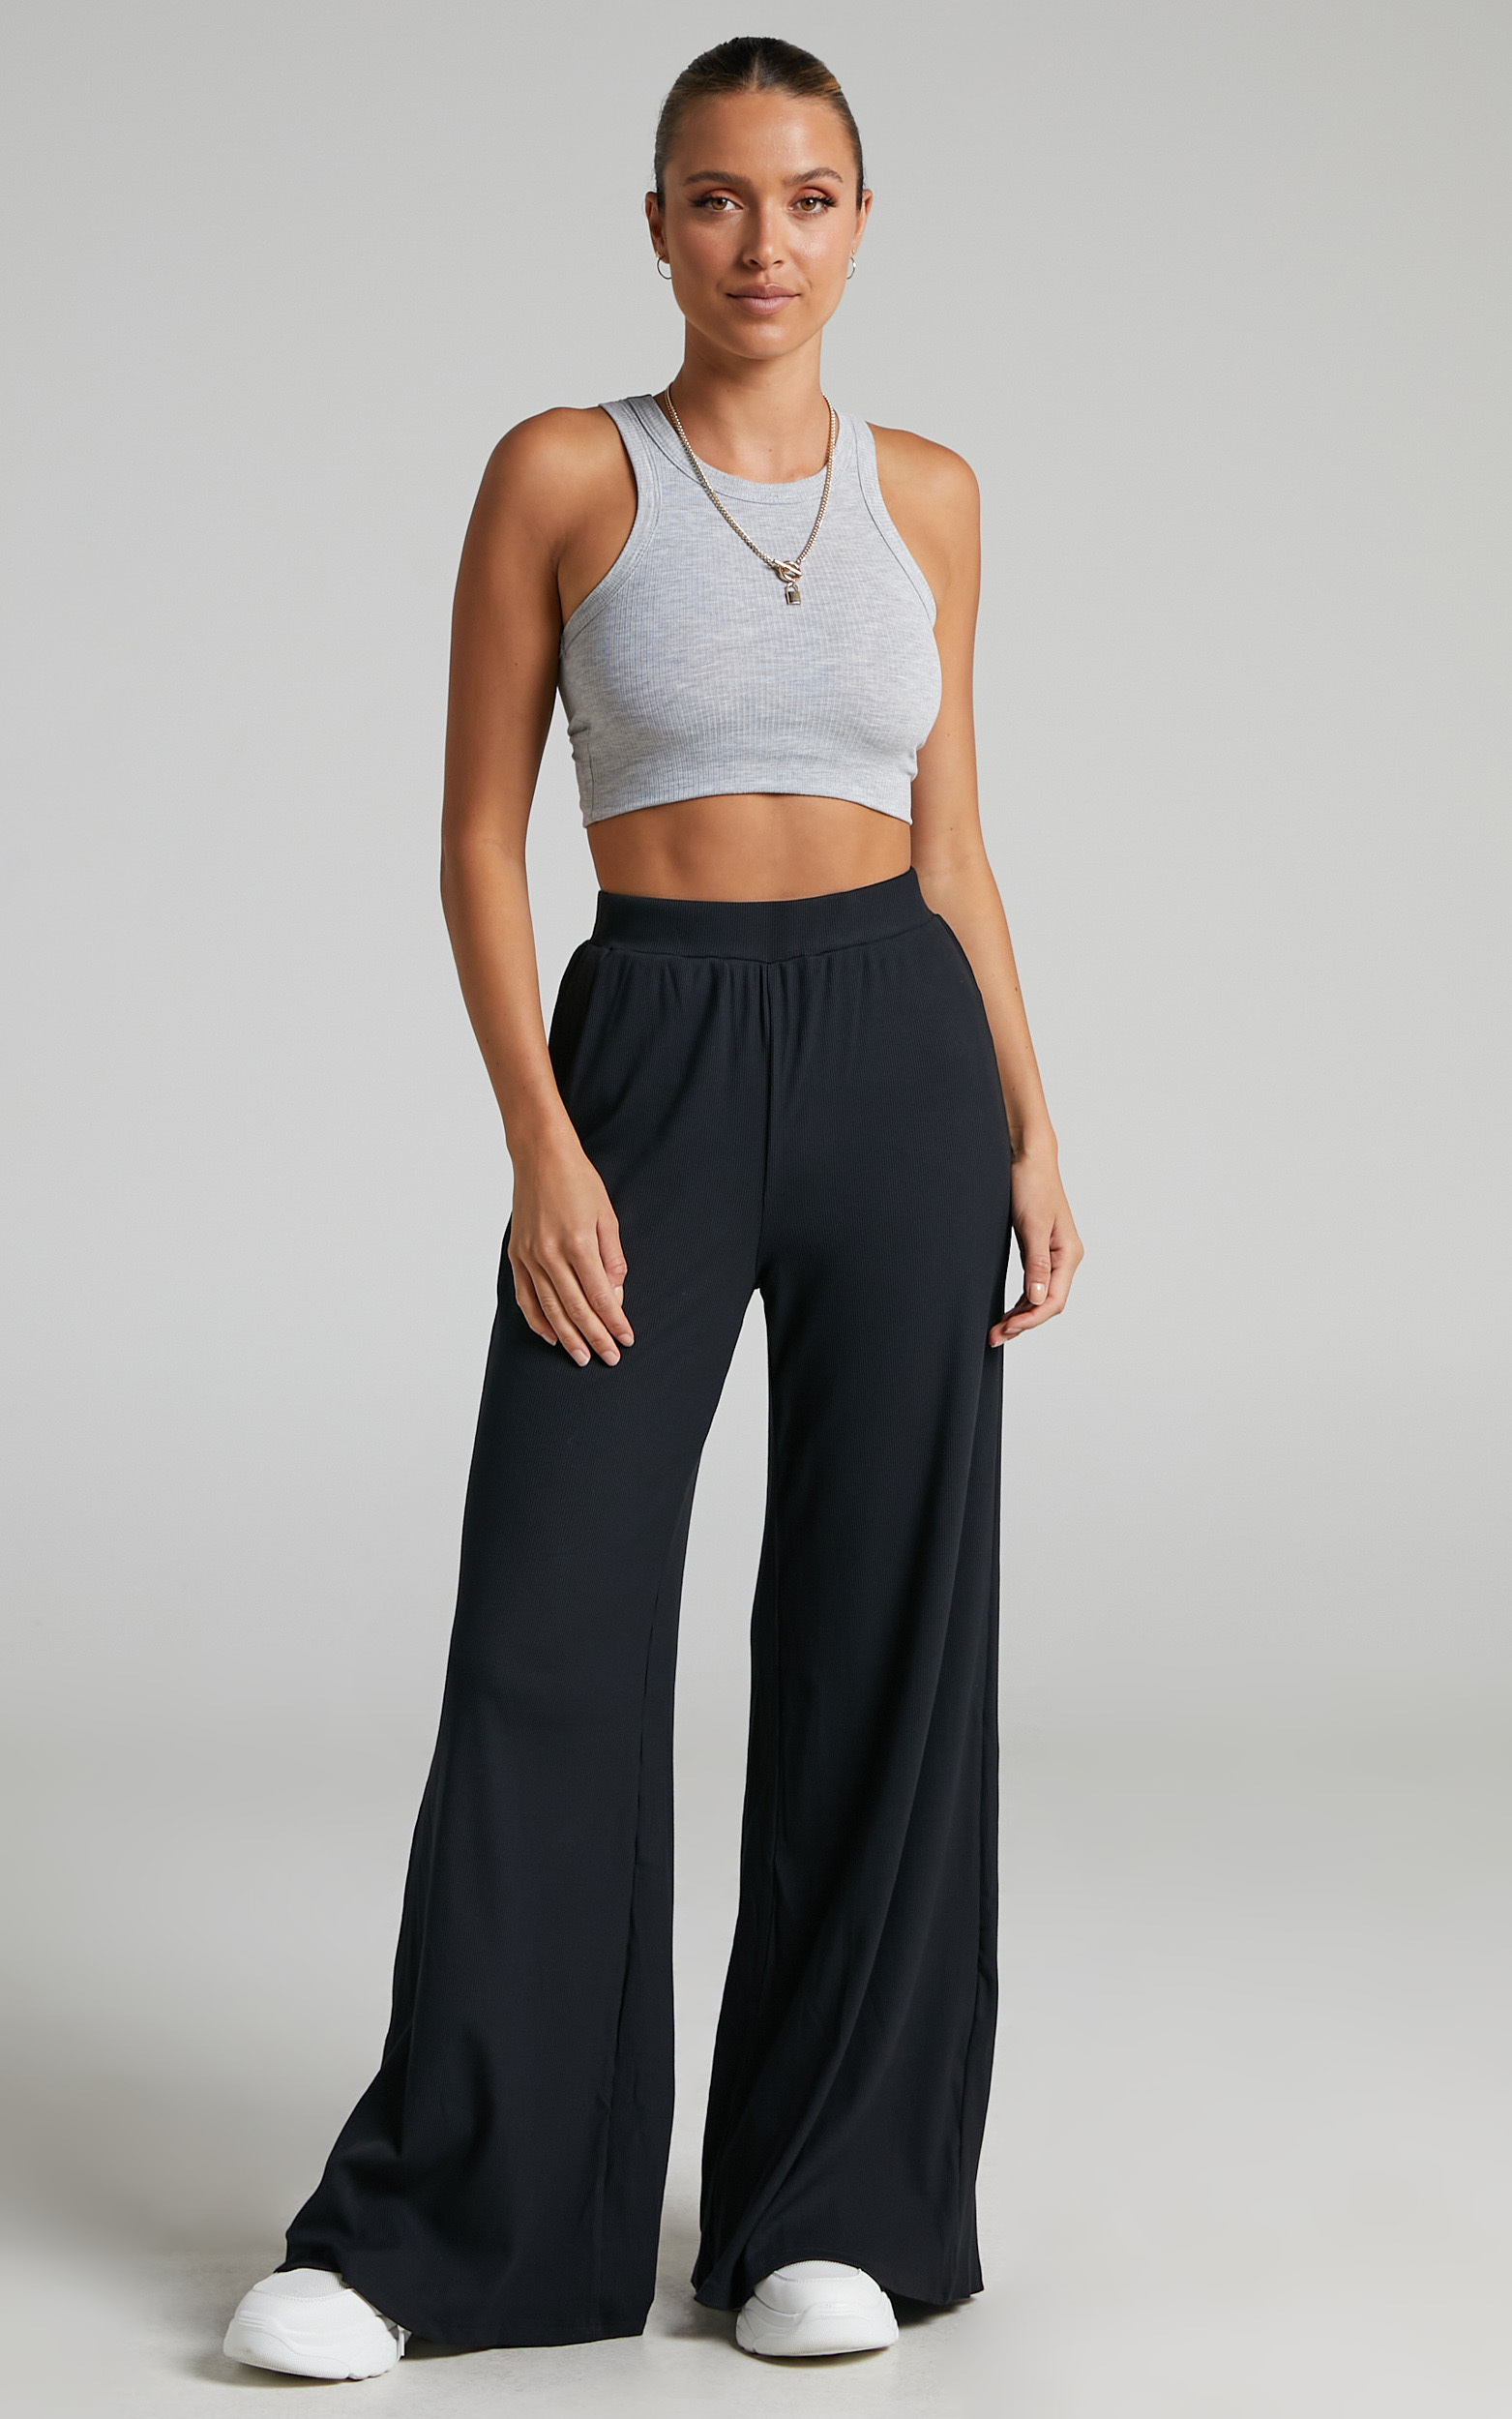 Amalthea - High Waisted Wide Leg Pant in Jersey Rib in Black - 04, BLK1, hi-res image number null